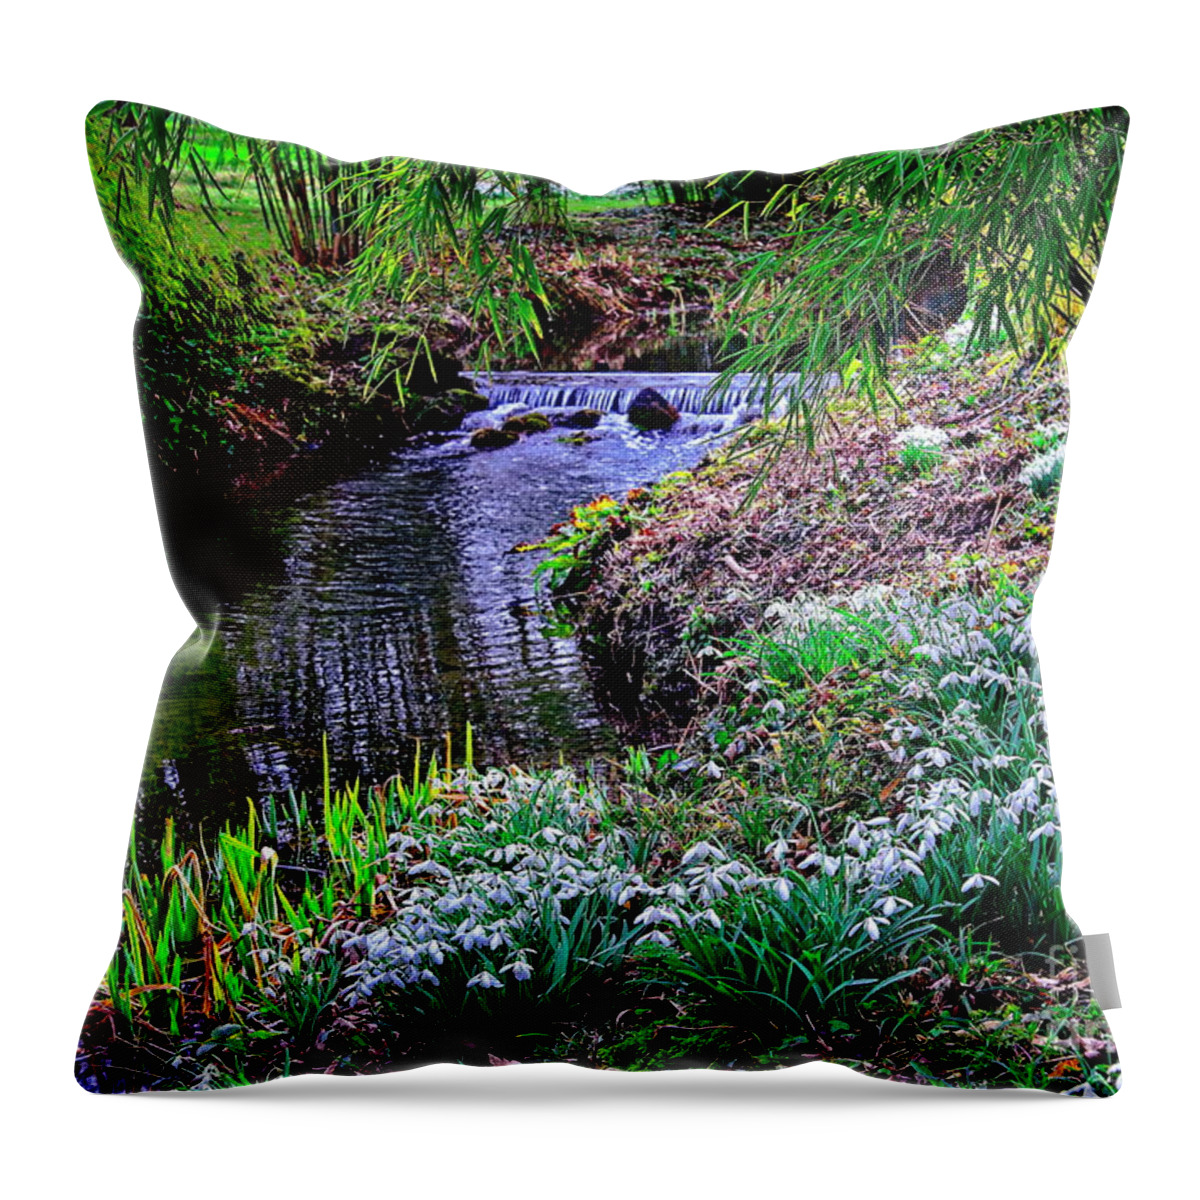 Snowdrops Throw Pillow featuring the photograph Spring Snowdrops by Stream by Martyn Arnold